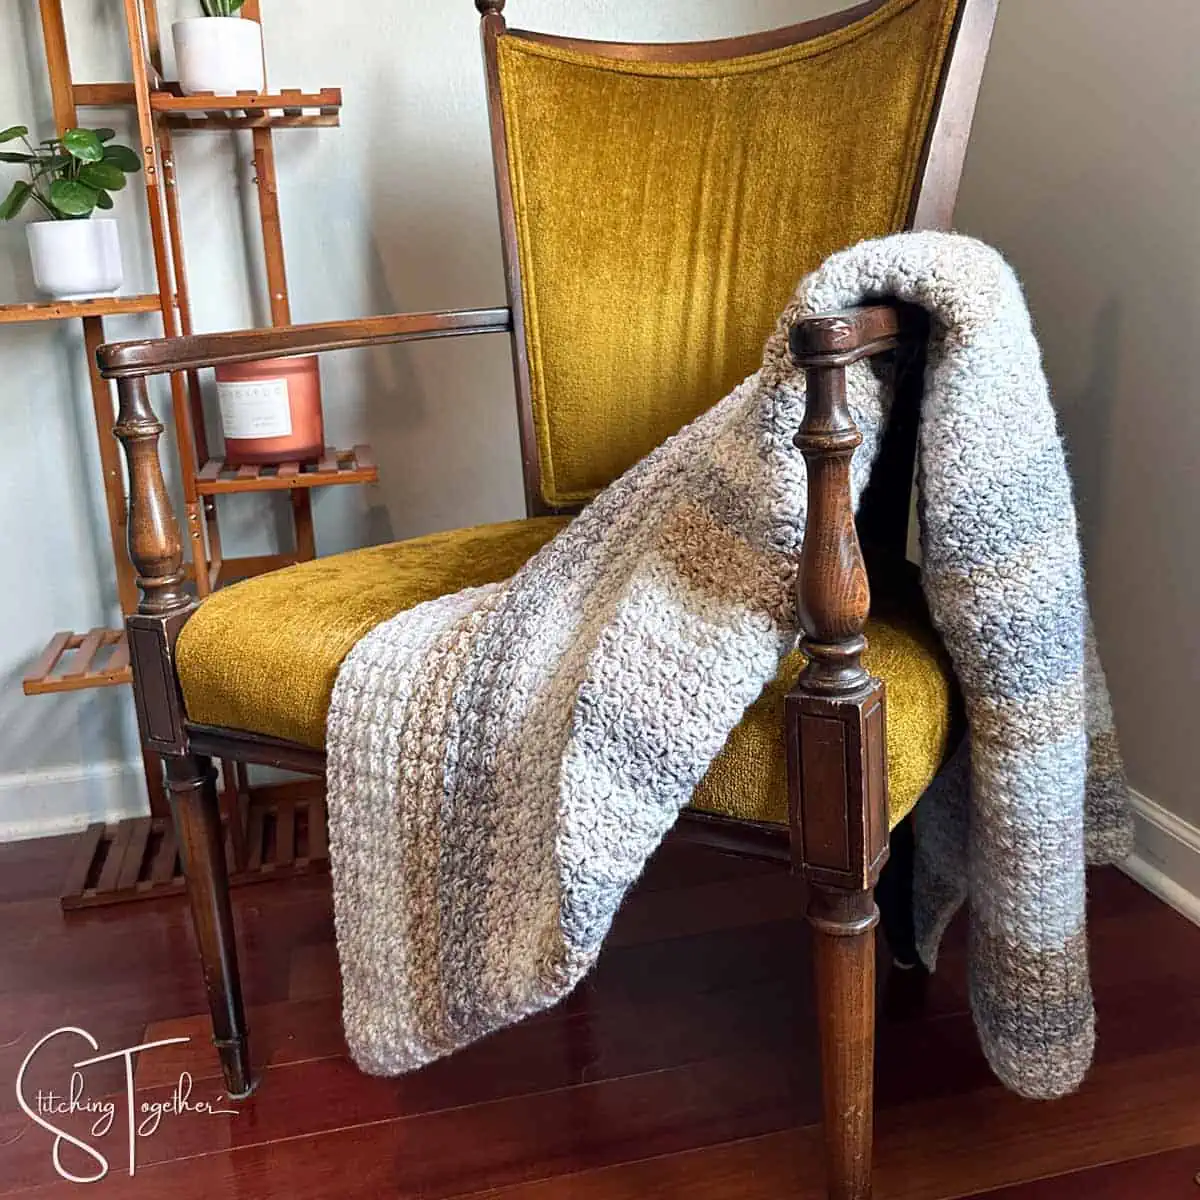 striped suzette stitch crochet blanket draped on the arm of a yellow chair